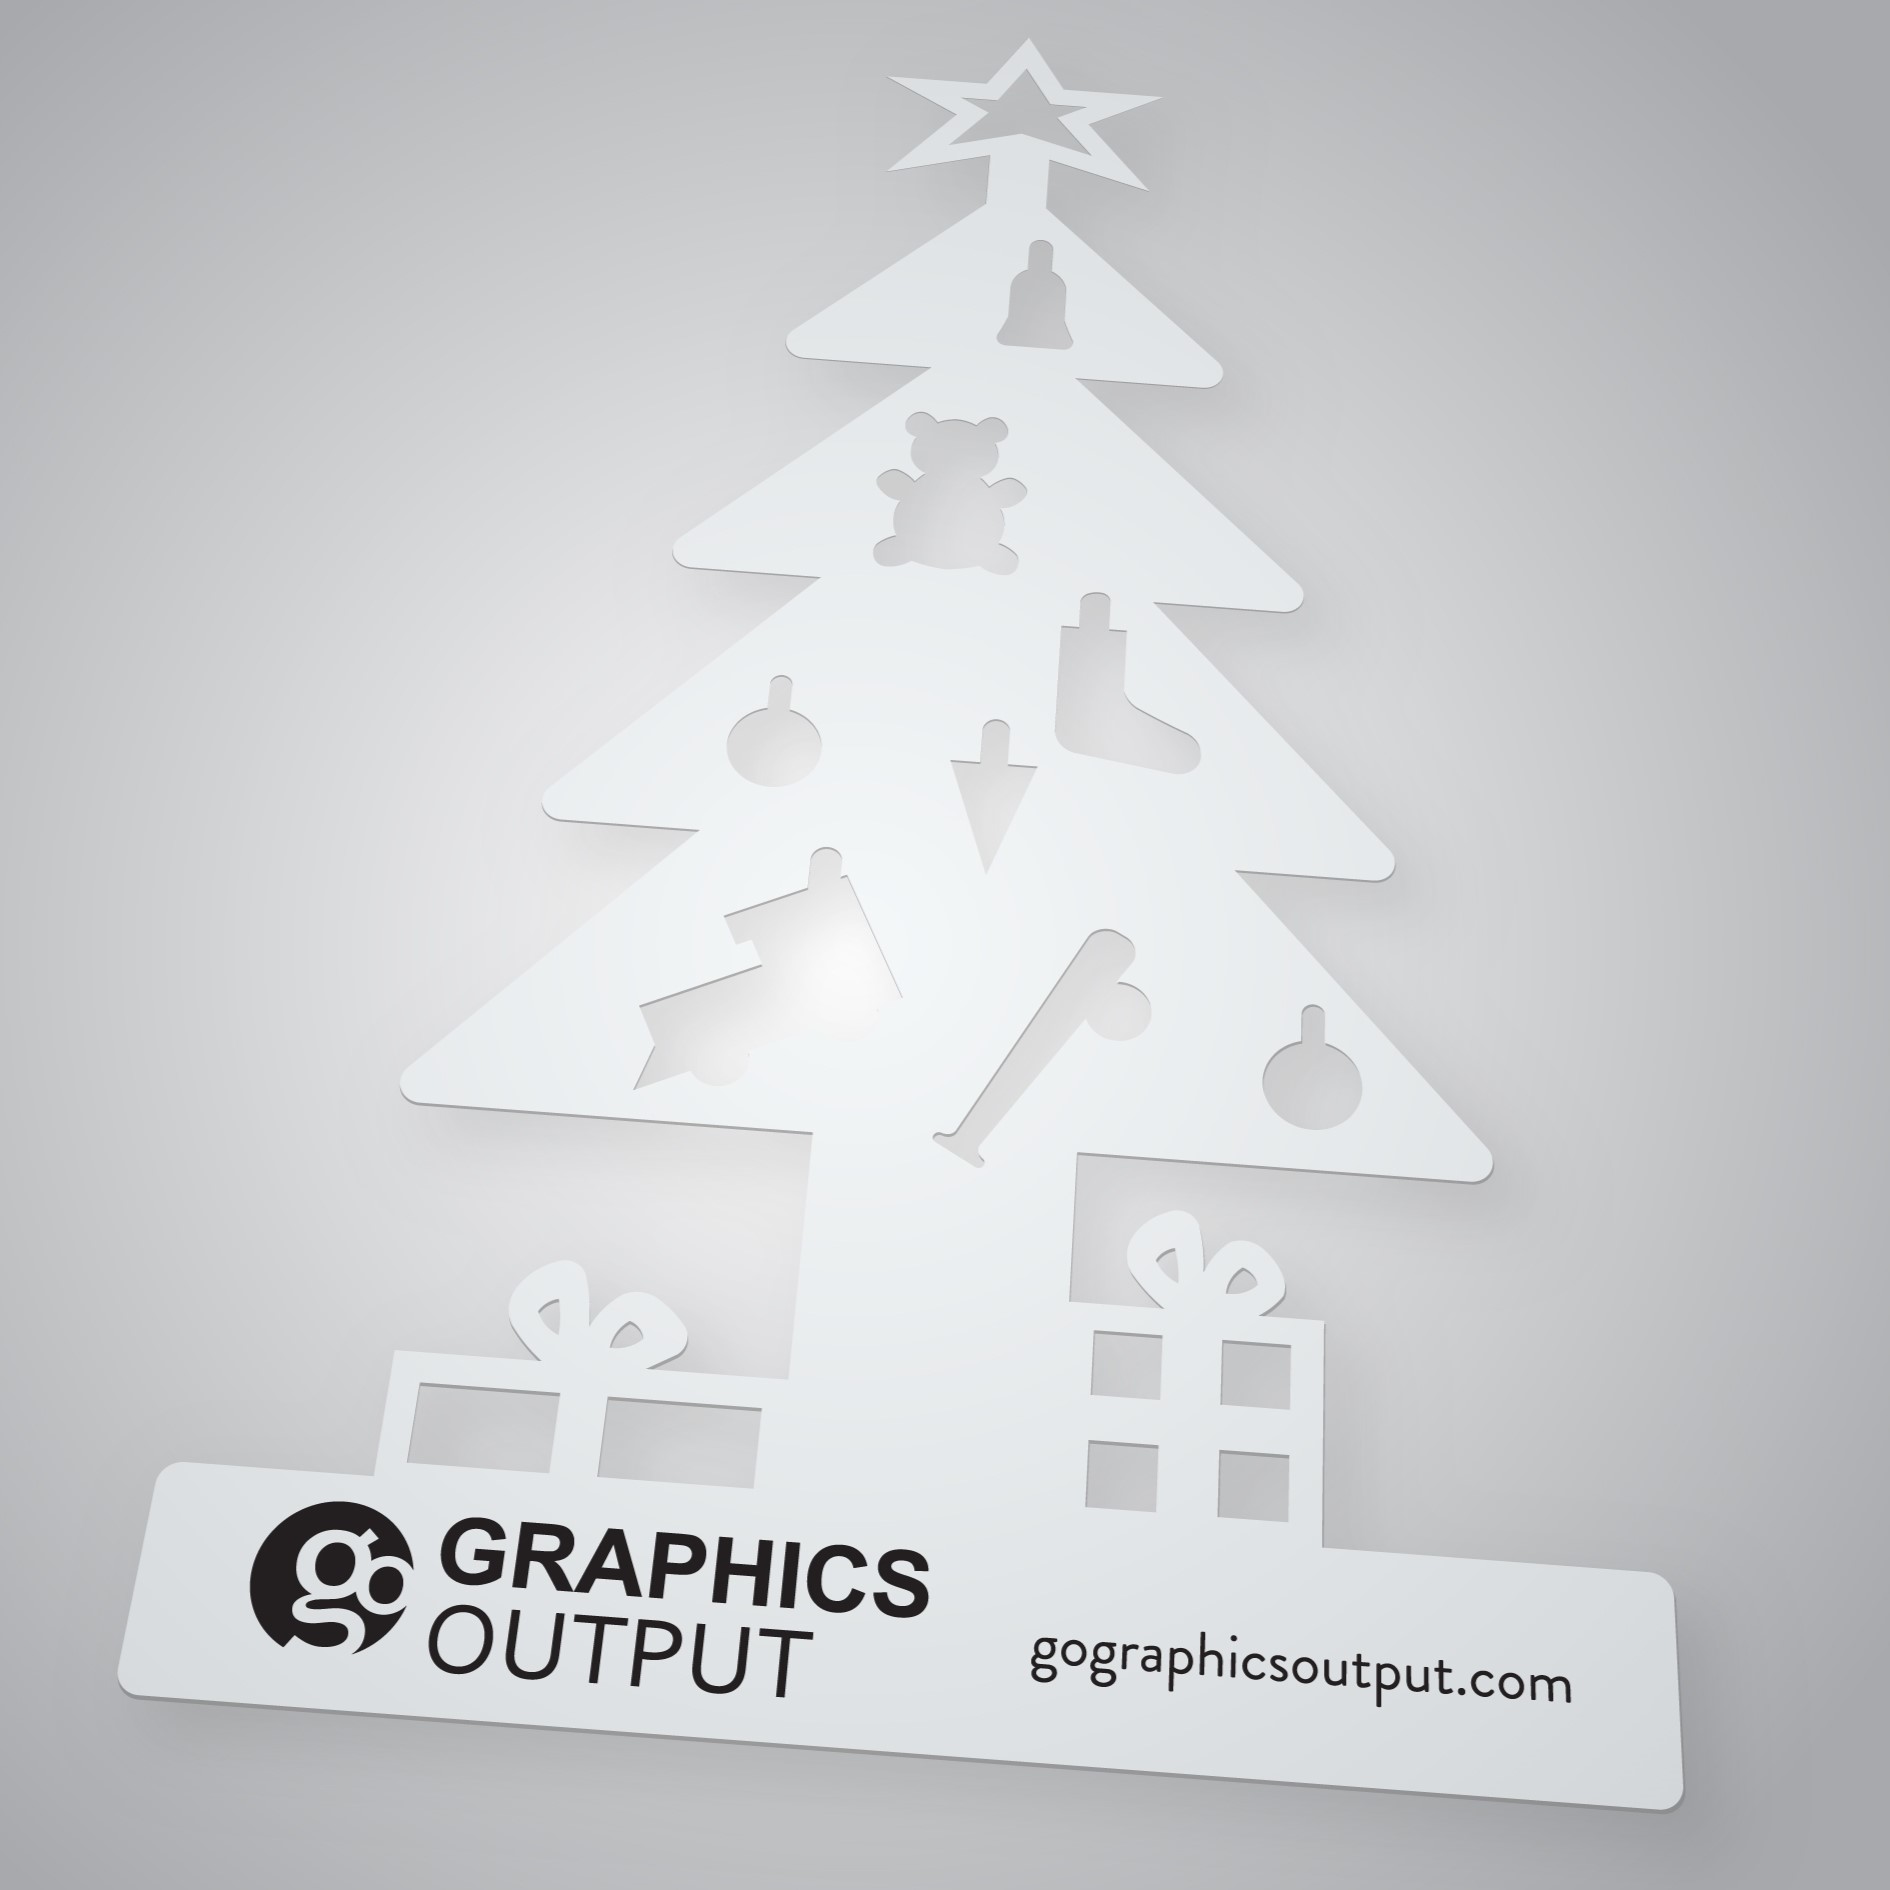 Custom-branded Christmas tree stencil with logo and contact info